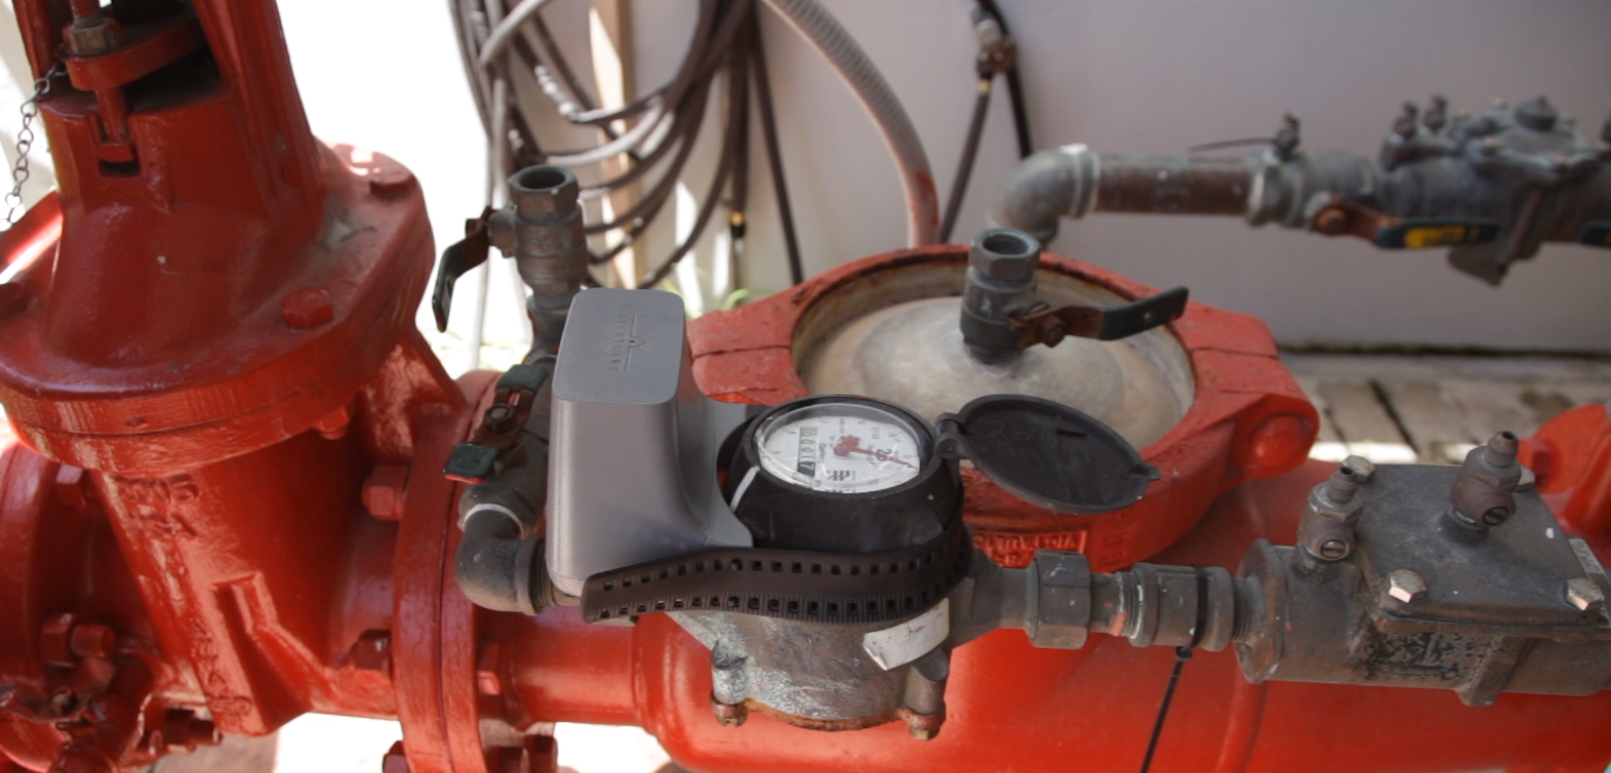 Close-up of a fire hydrant with pressure gauges and valves for maintenance